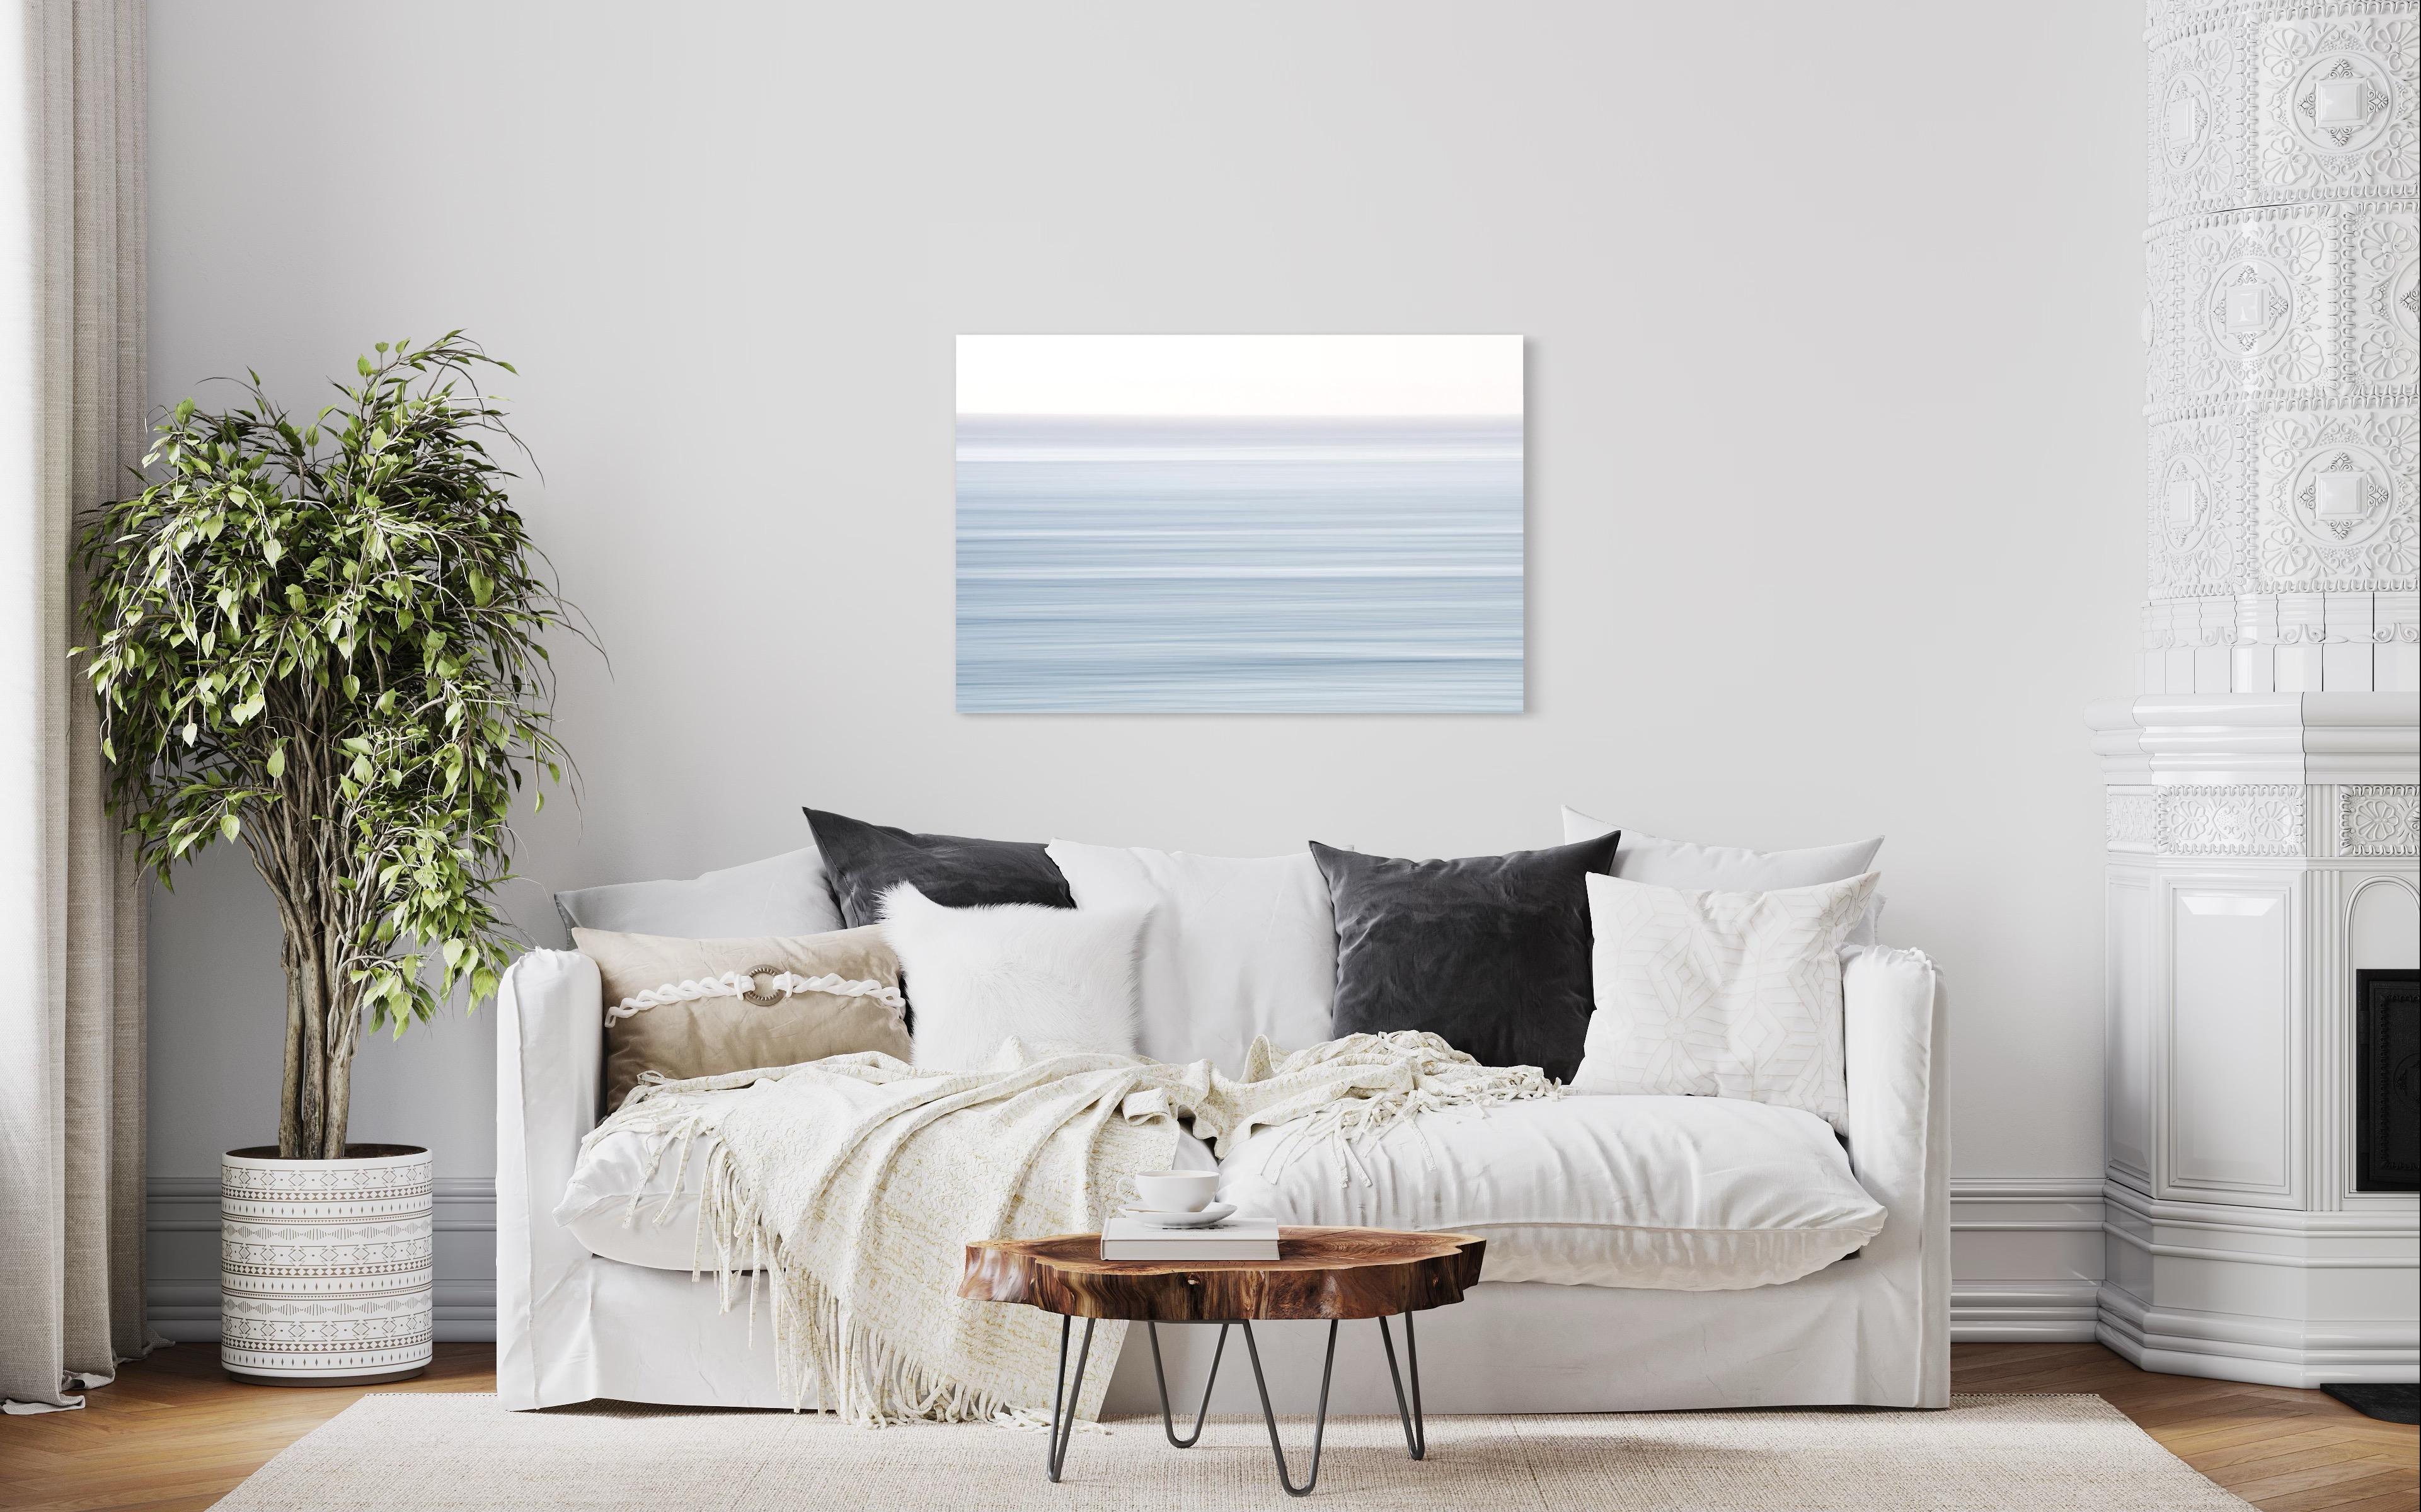 This photograph by Tori Gagne features an abstracted landscape composition and a light blue-grey and white palette. An edition size of 50, this photograph is available as a metal sublimation print with a 1.3” deep silver flush mount frame and white